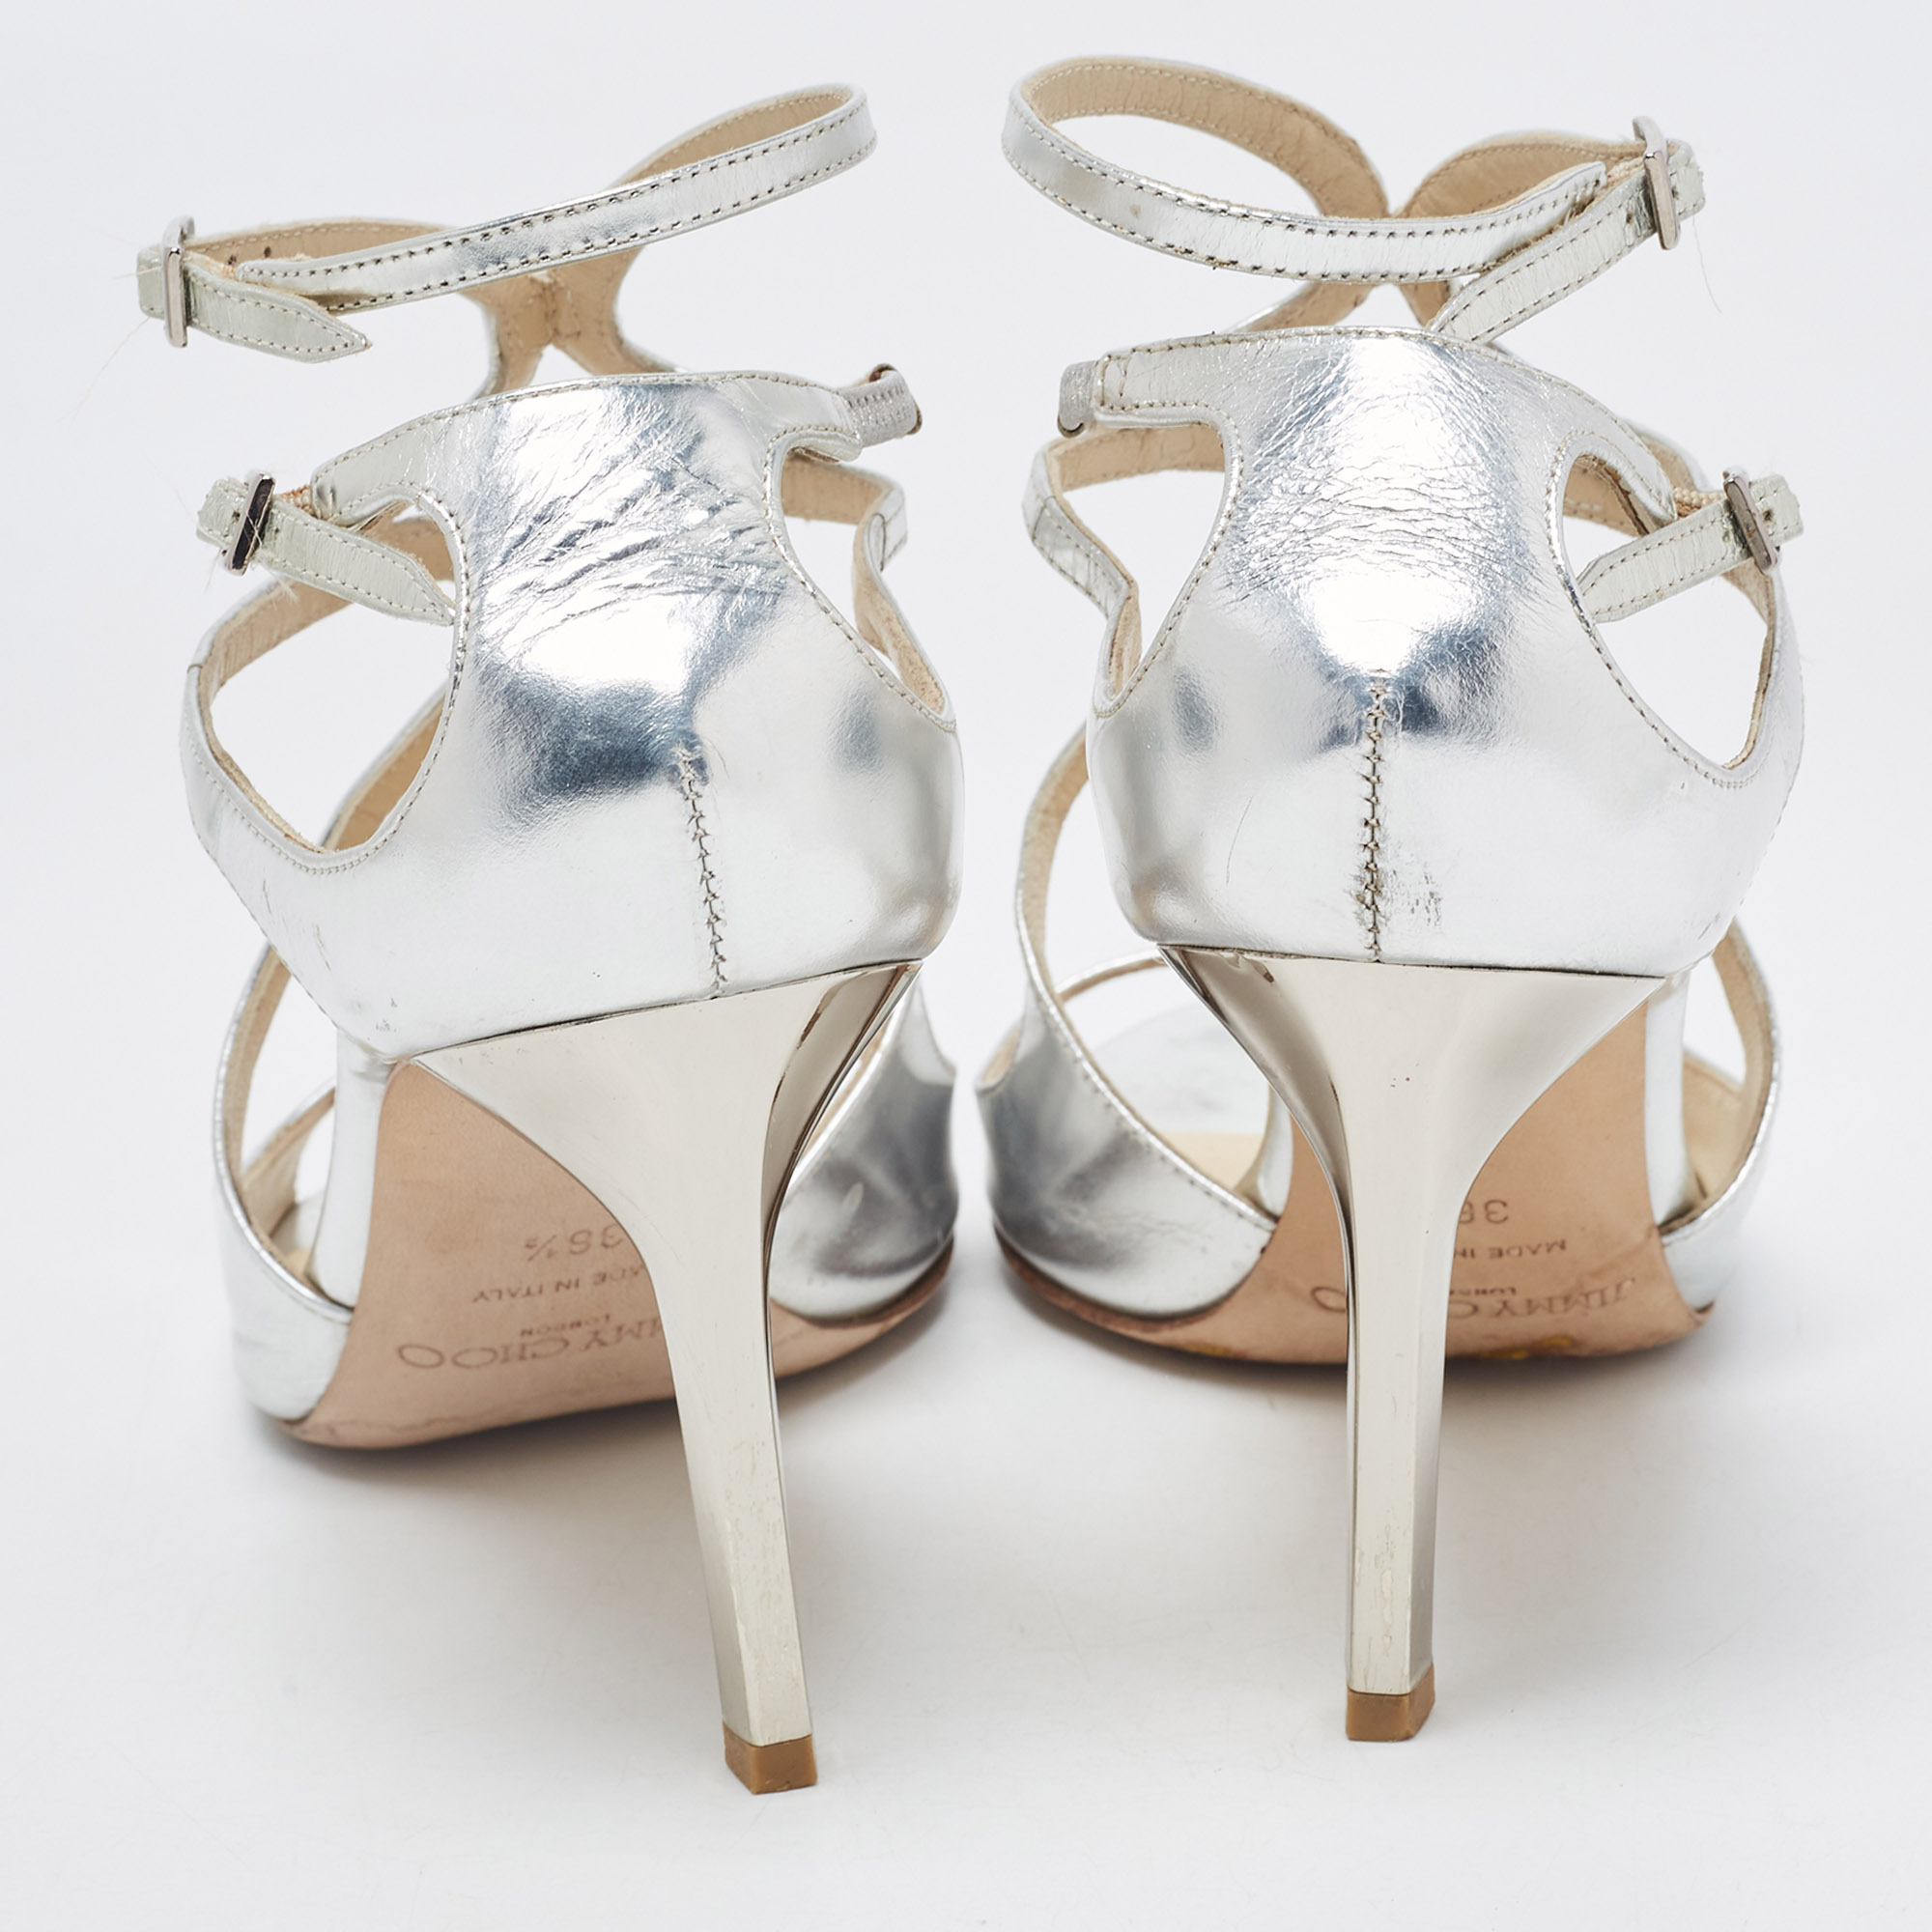 Jimmy Choo Silver Leather Ivette Strappy Sandals Size 36.5